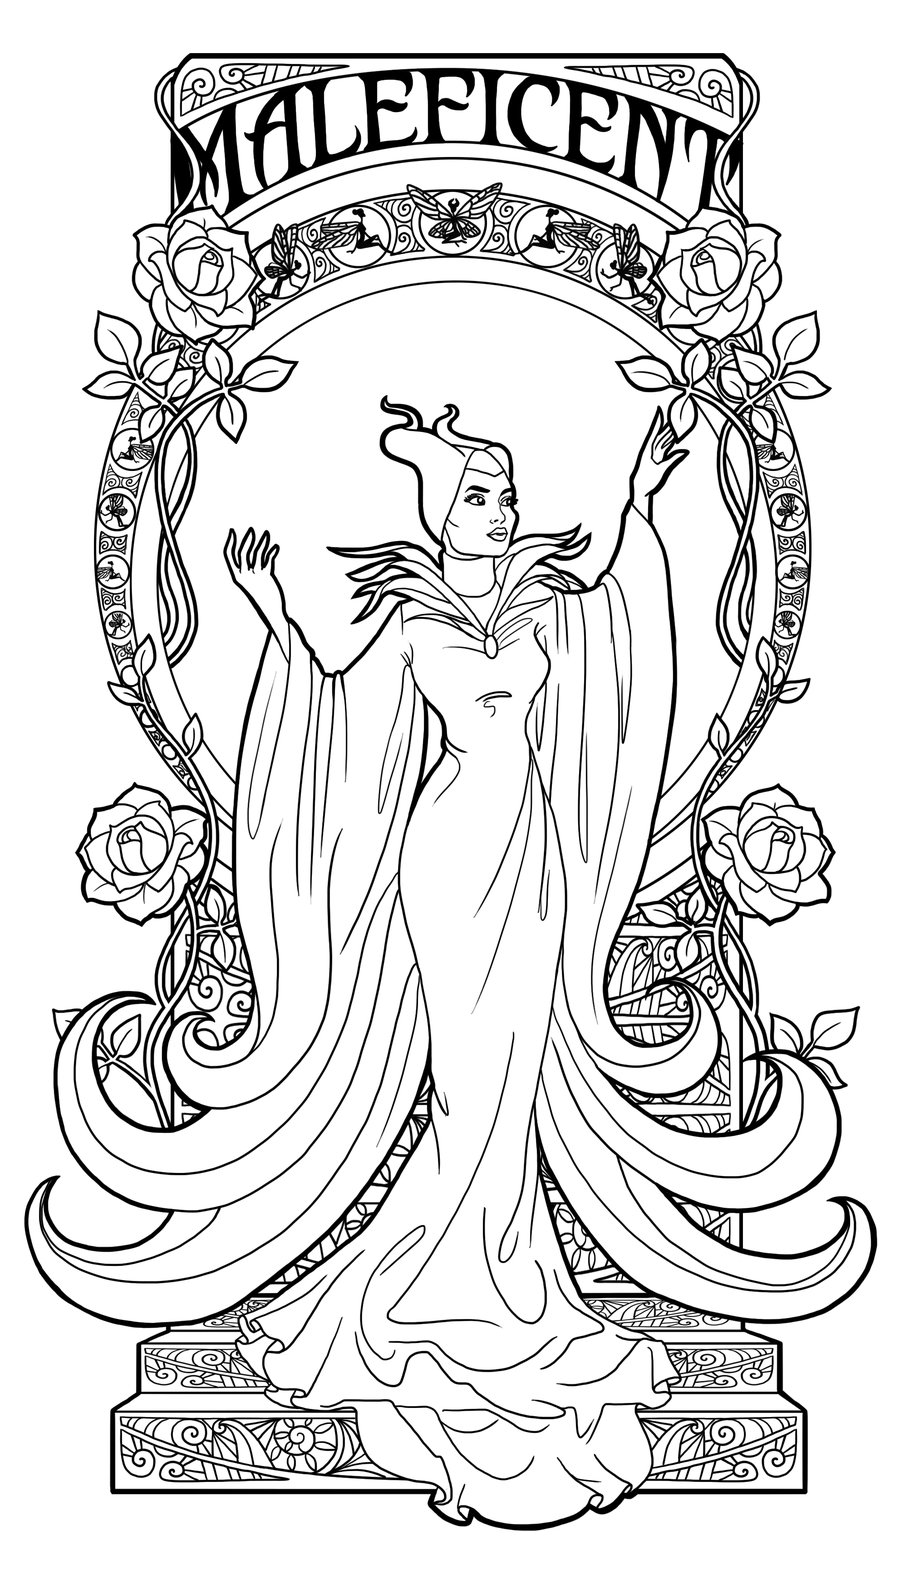 Maleficent Disney Villains Coloring Pages Hard Coloring Disney | The ...